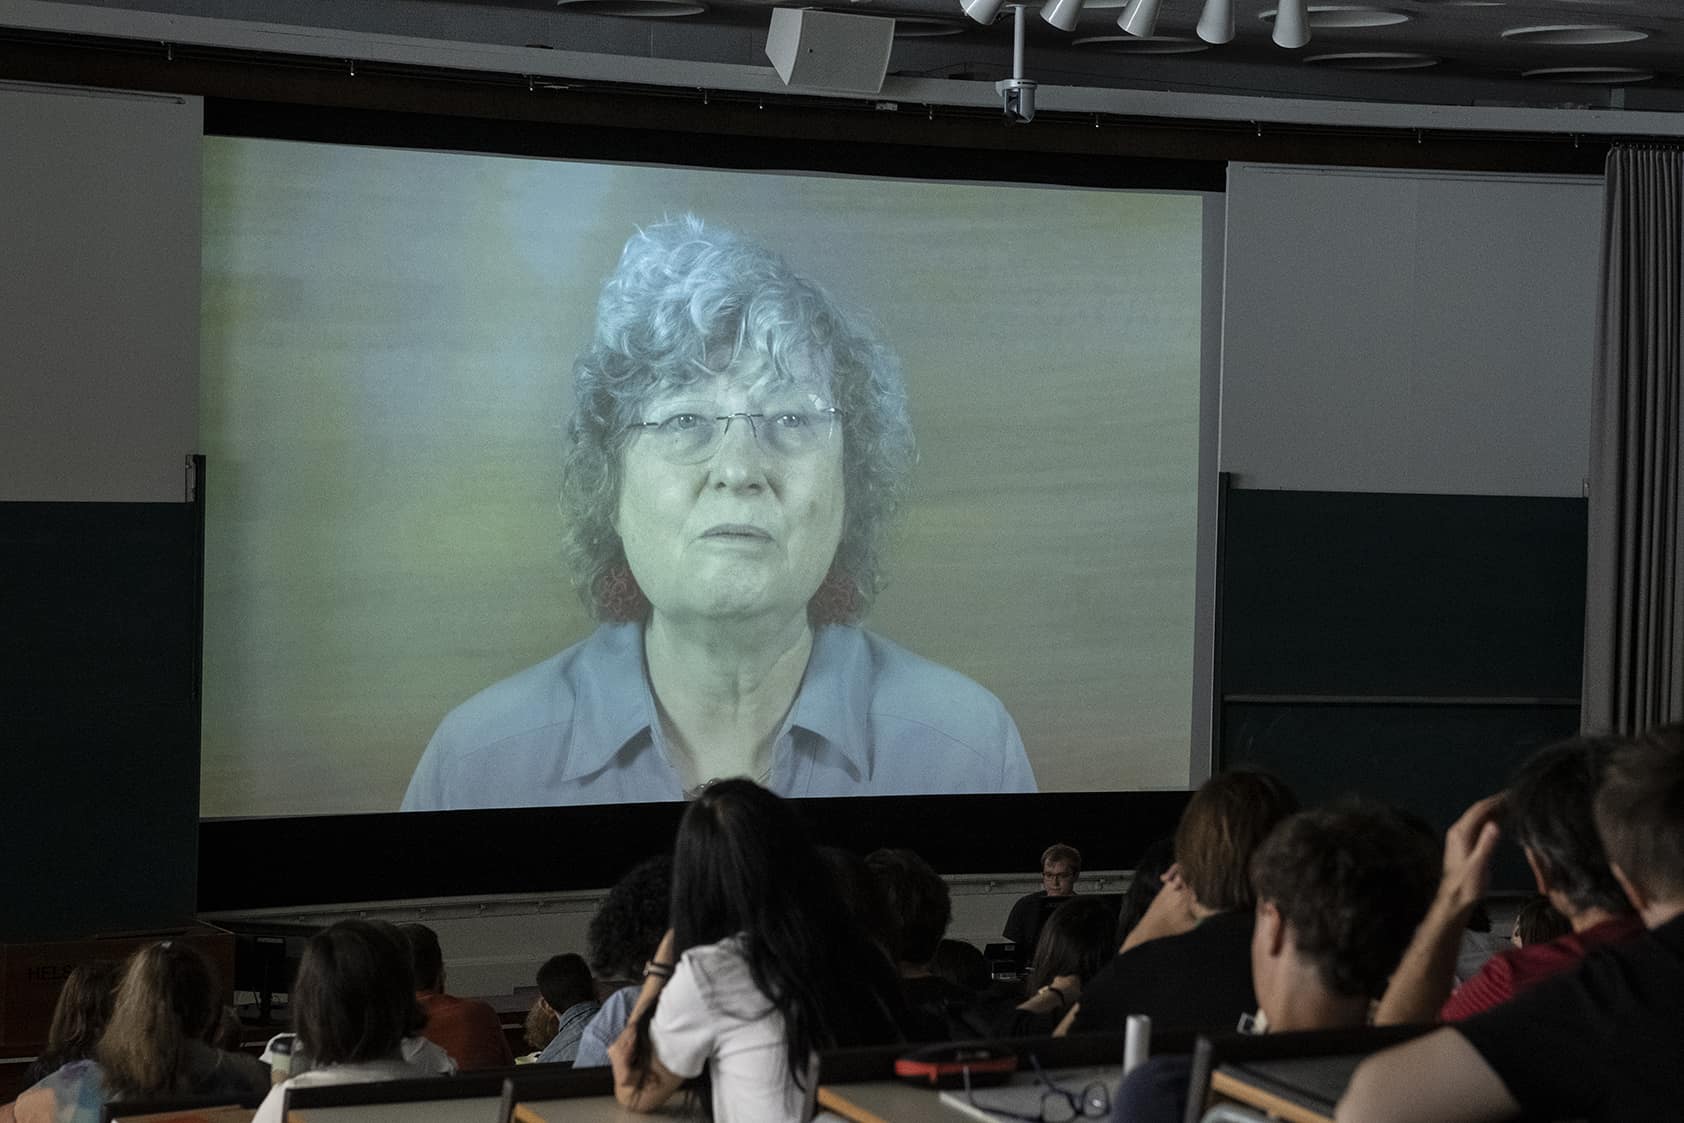 OAL Prize 2022 : Ingrid Daubeschies, former IMU president, presents the OAL Prize